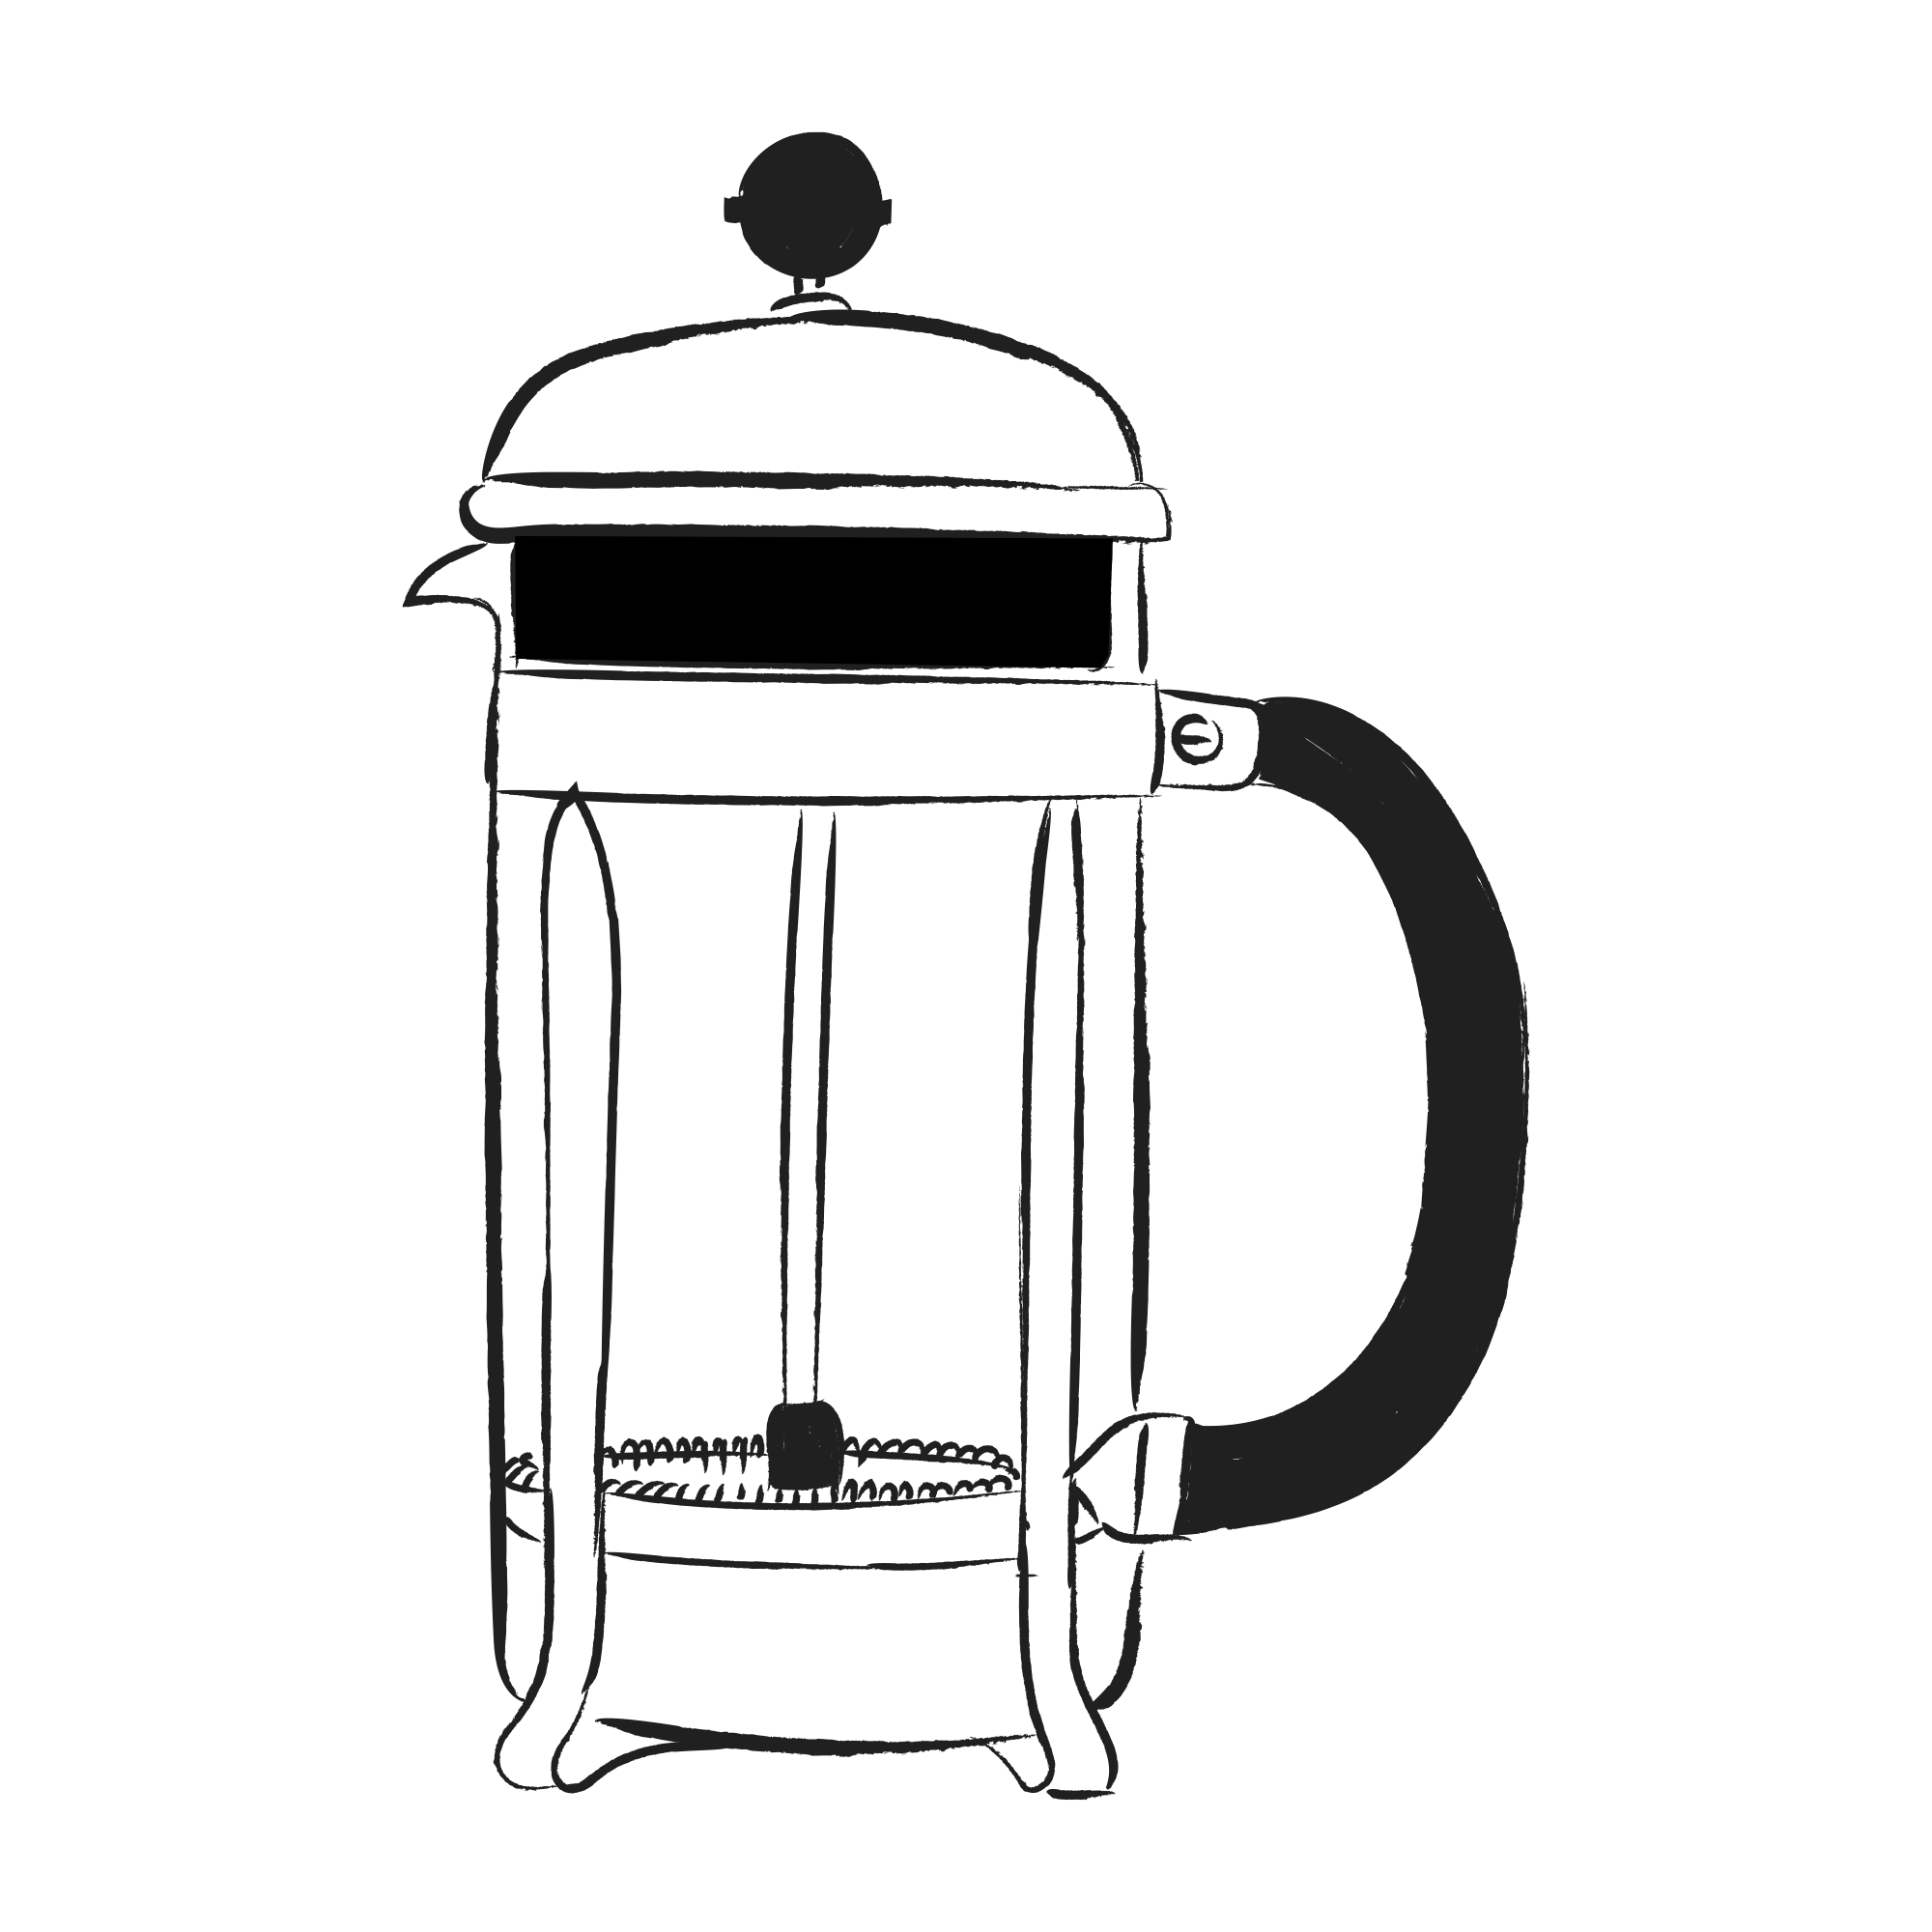 ViCAFE French Press Brew Guide